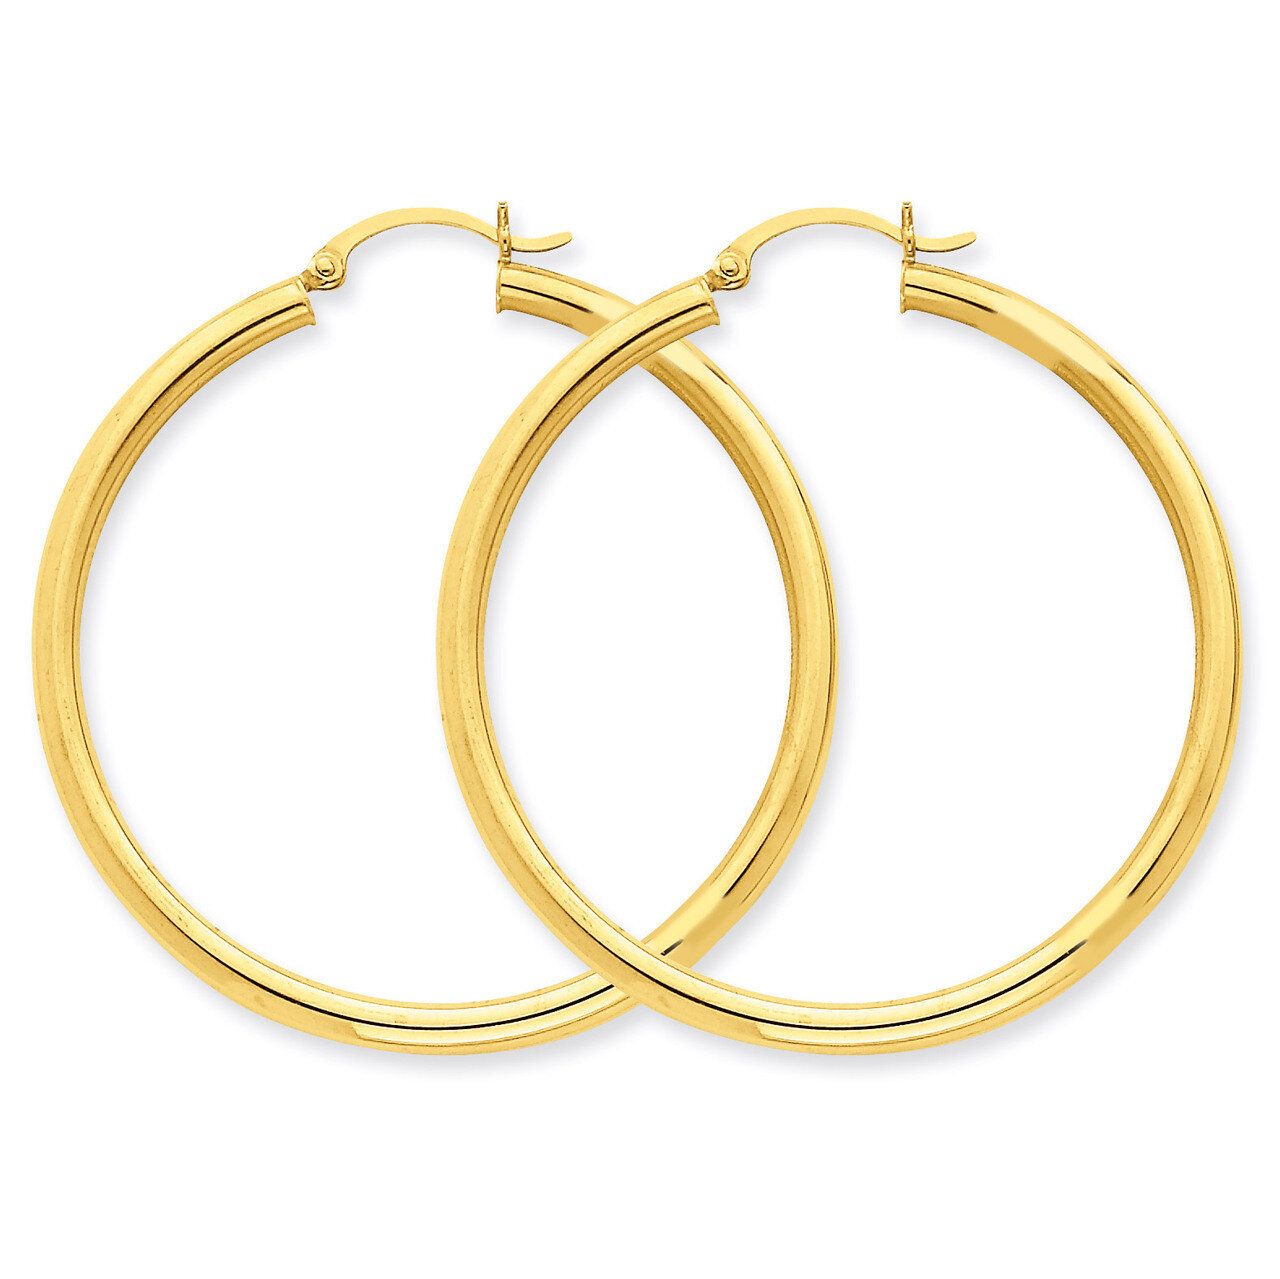 Polished 3mm Round Hoop Earrings 10k Gold 10T942